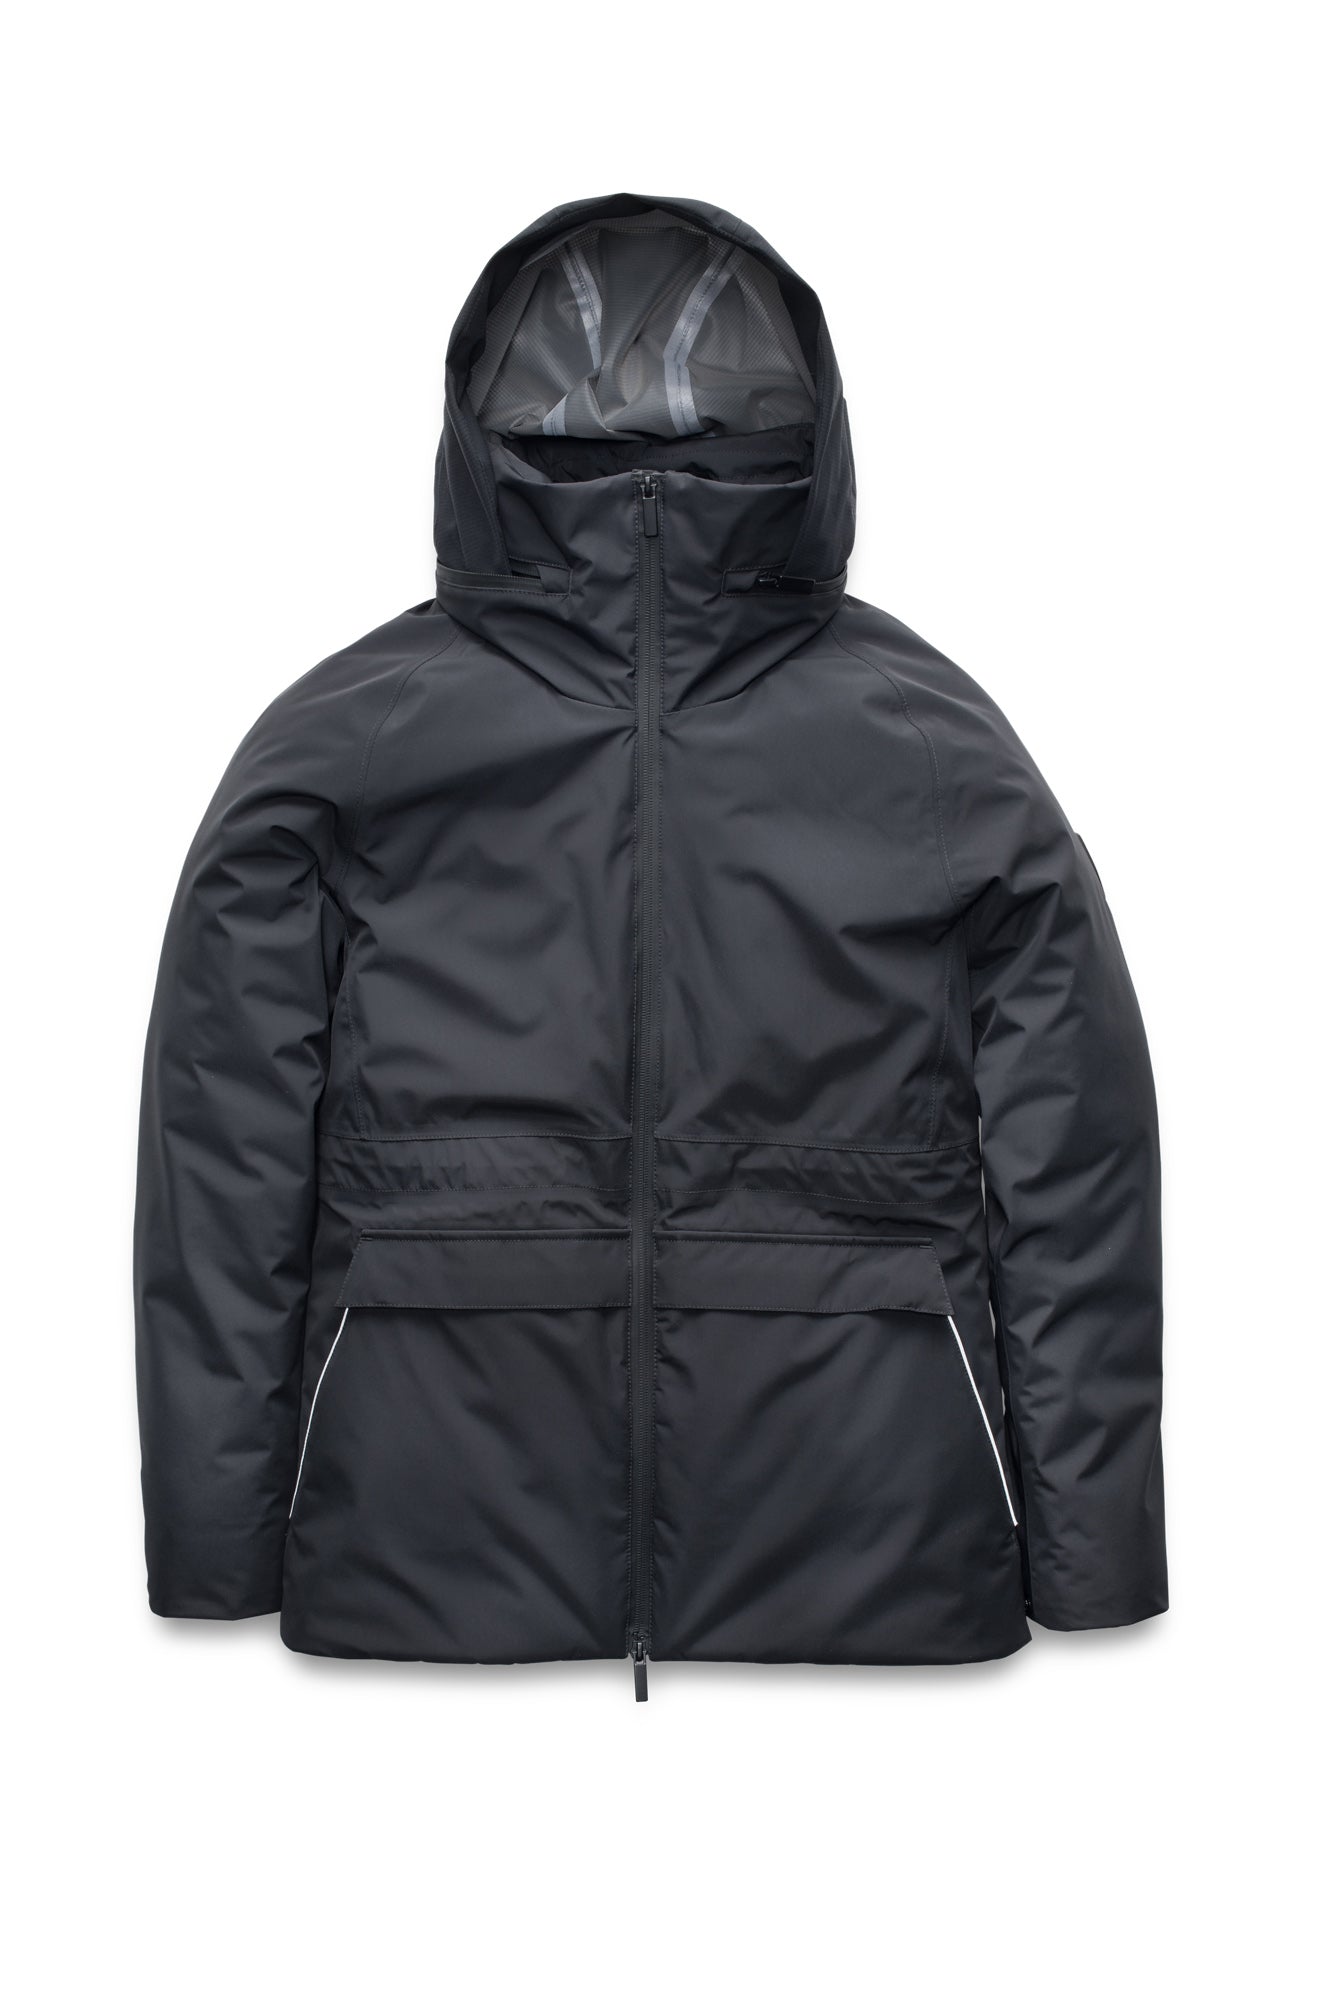 Litho Ladies Short Parka in hip length, Canadian duck down insulation, tuckable waterproof hood, and two-way zipper, in Black